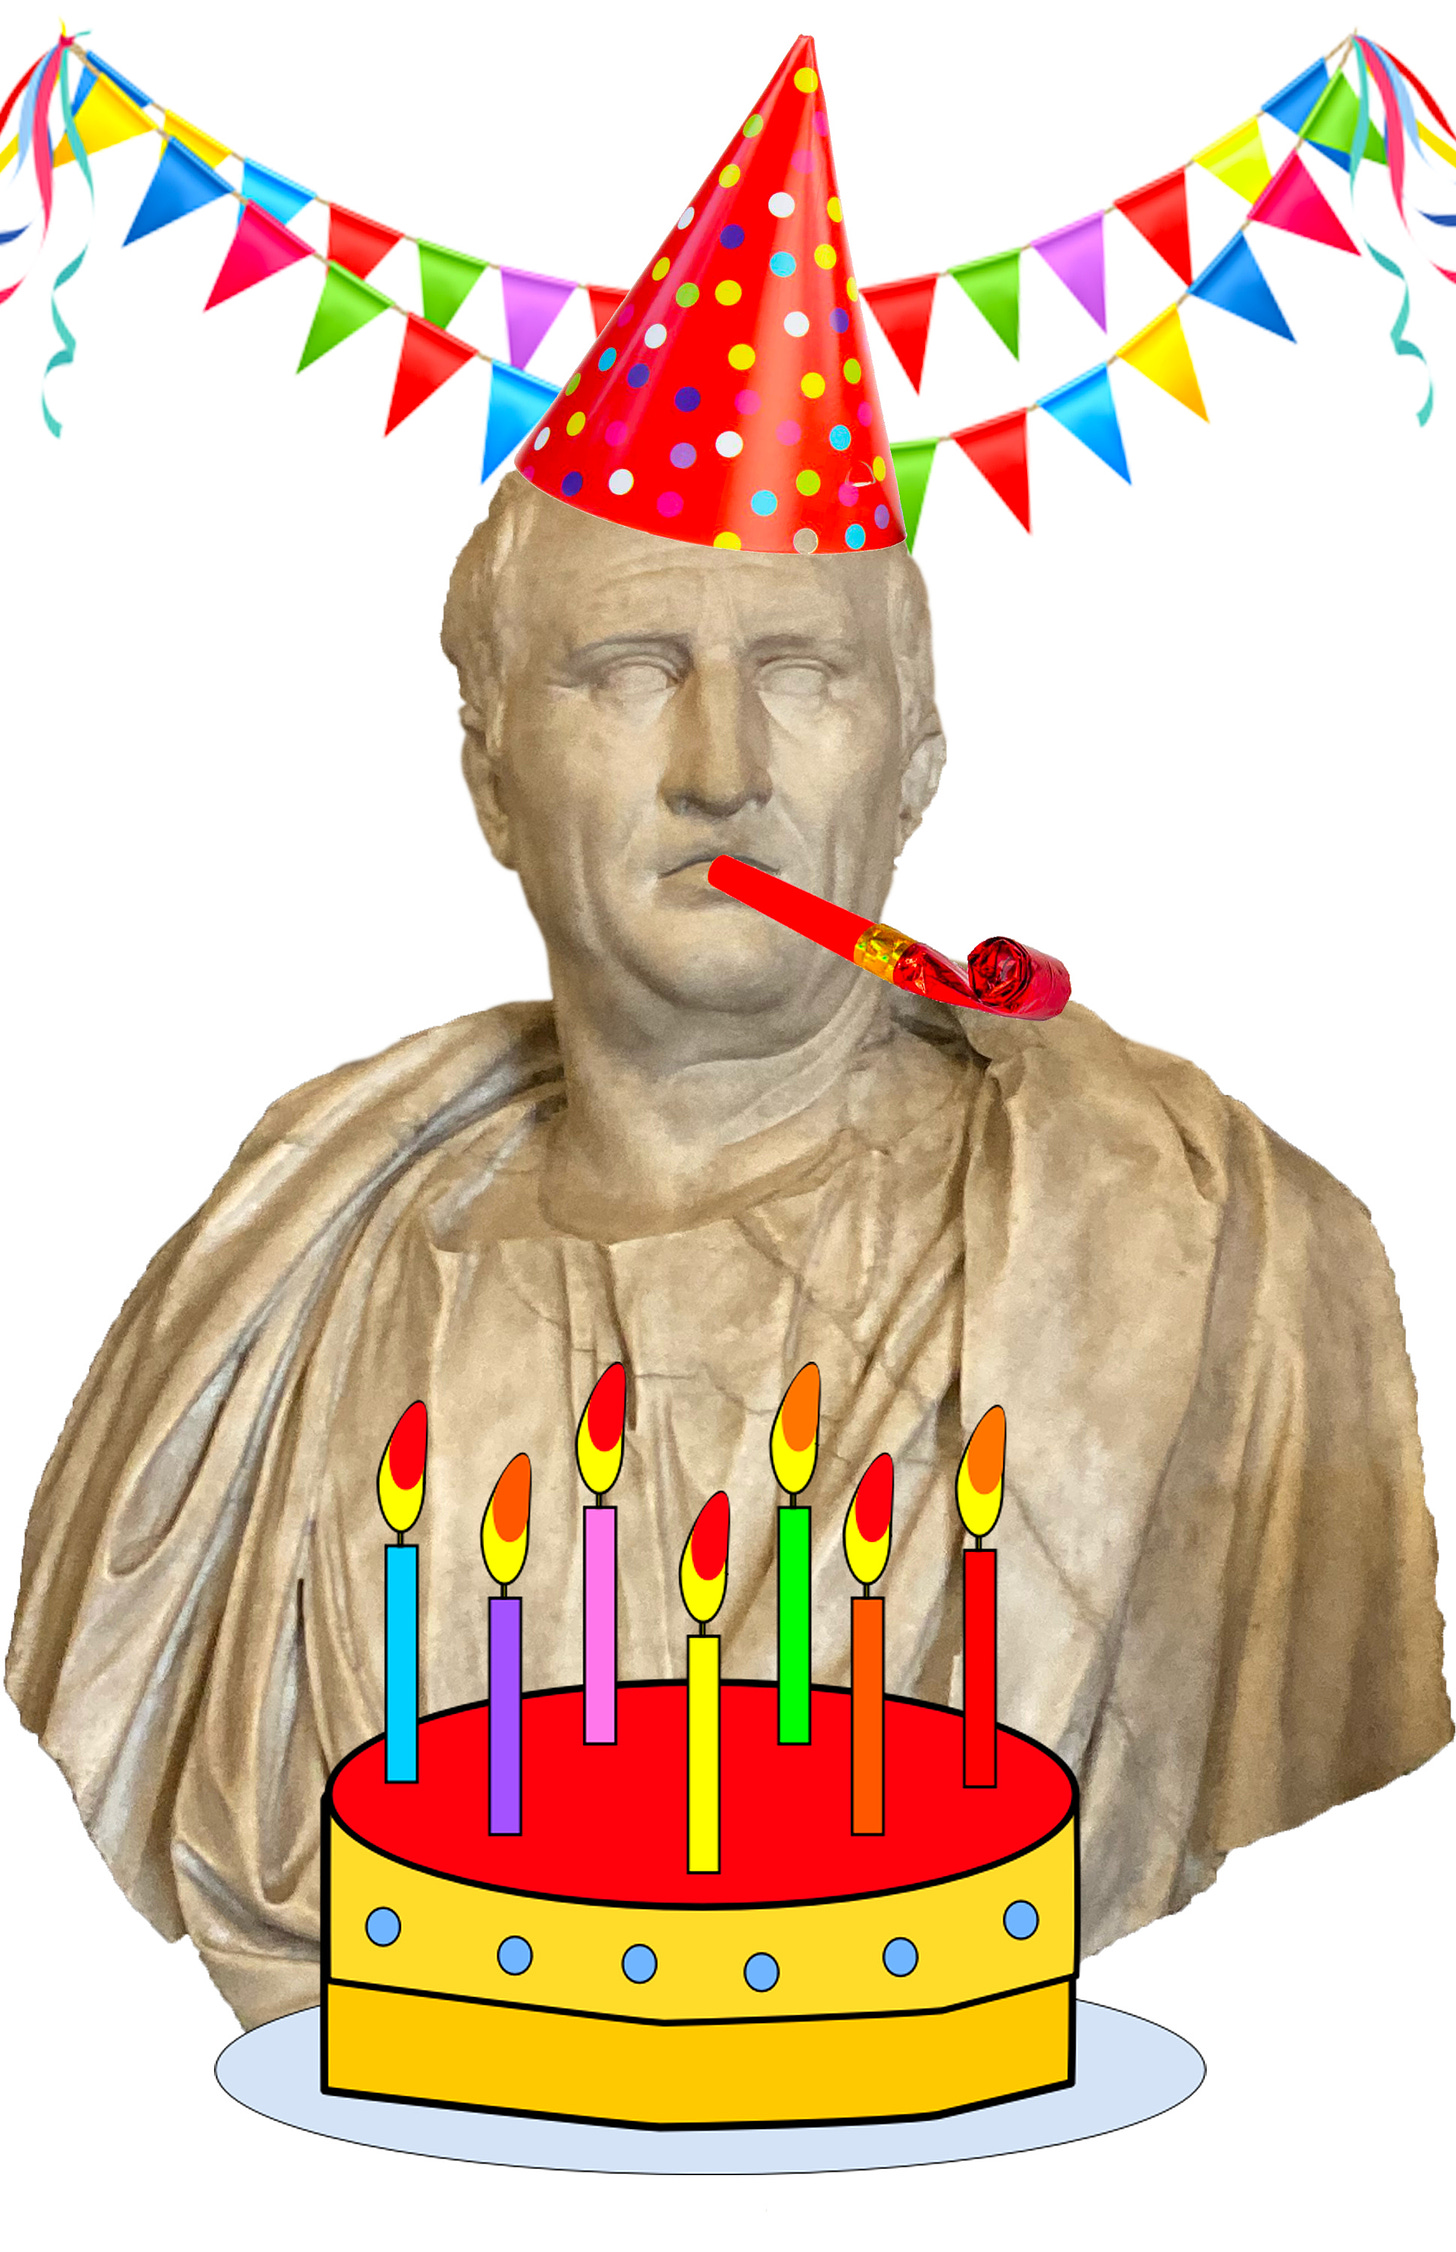 A photo of a bust of Cicero, badly photoshopped so that he is wearing a colourful party hat and blowing a party horn. There is a cartoon clip art birthday cake in front of him and rainbow bunting in the background.